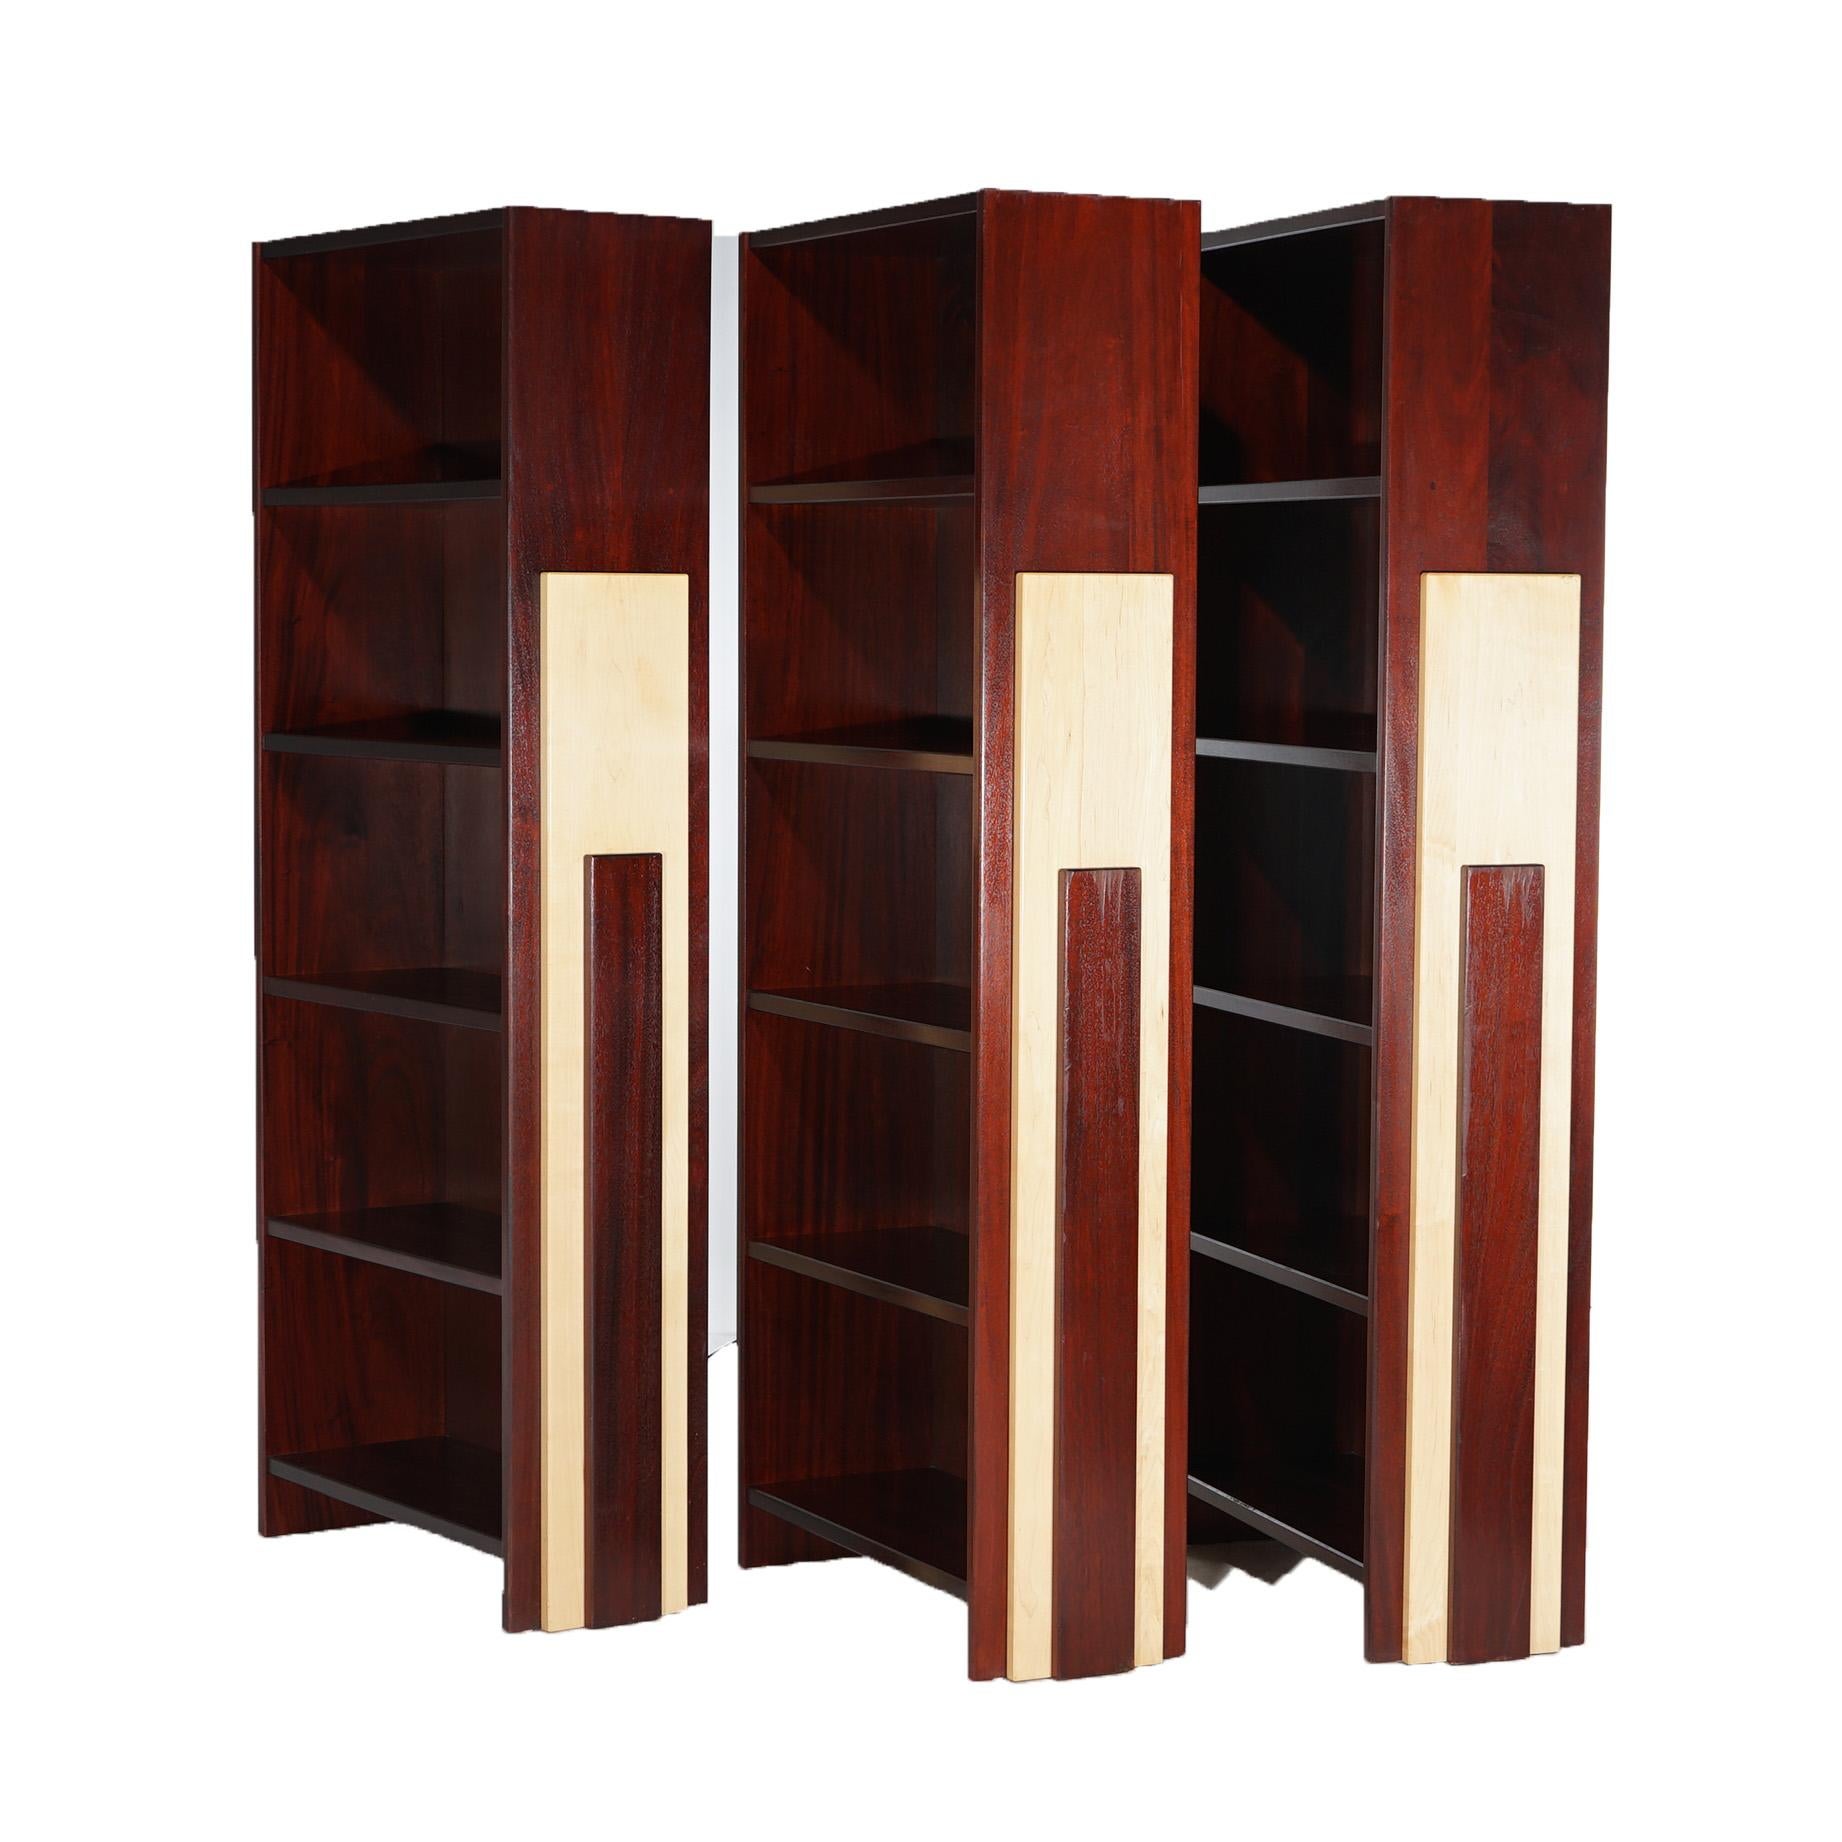 A set of three Mid Century Modern bookcases offer mahogany construction with open shelves and cut-out maple facing on sides, 20thC


Measures- 81.75''H x 35.5''W x 13.5''D